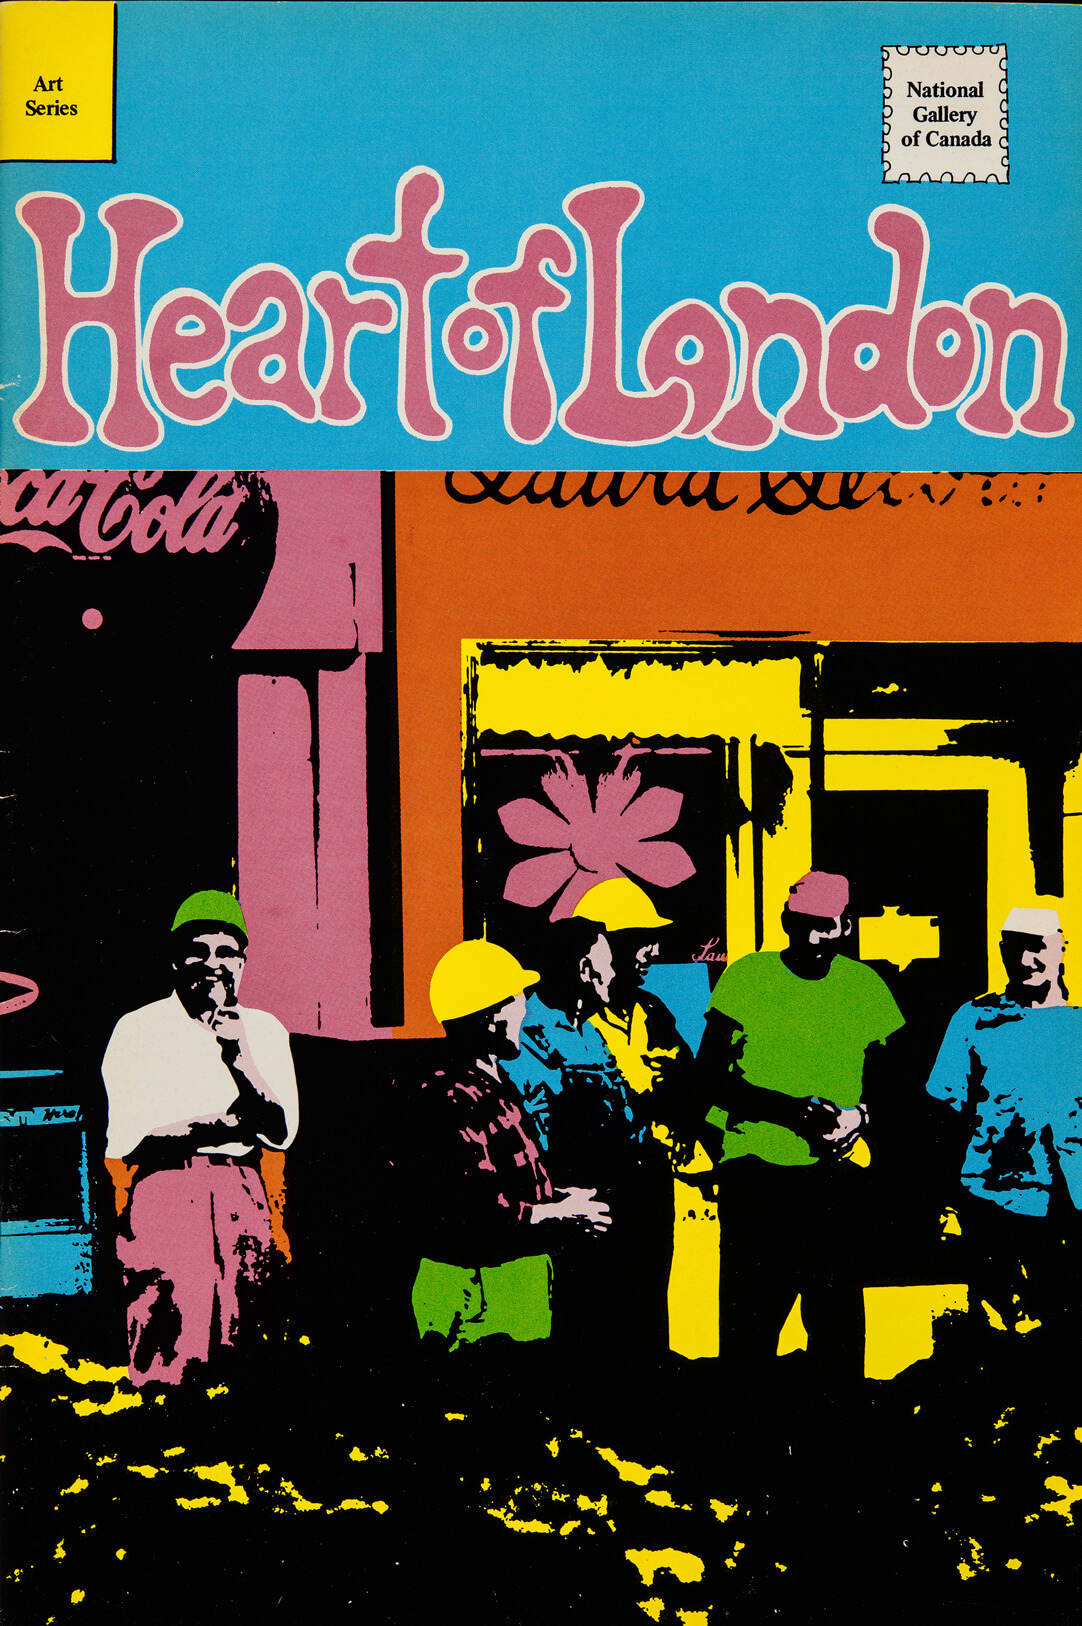 Art Canada Institute, Greg Curnoe, Cover of Heart of London, Ottawa: National Gallery of Canada, 1969